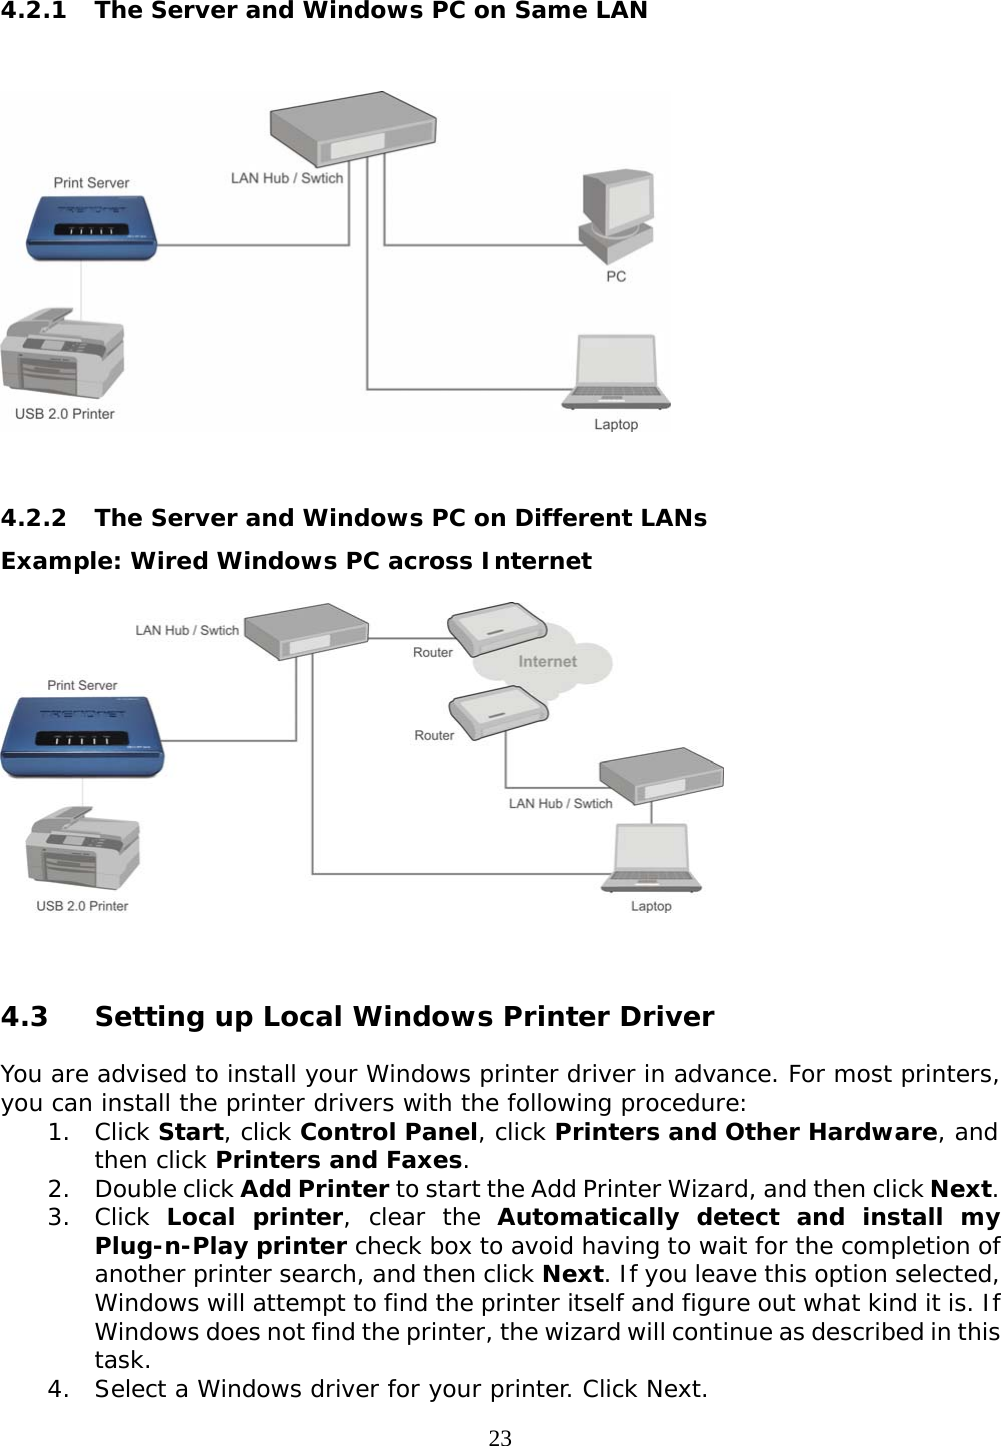     234.2.1 The Server and Windows PC on Same LAN     4.2.2  The Server and Windows PC on Different LANs Example: Wired Windows PC across Internet   4.3 Setting up Local Windows Printer Driver  You are advised to install your Windows printer driver in advance. For most printers, you can install the printer drivers with the following procedure:  1. Click Start, click Control Panel, click Printers and Other Hardware, and then click Printers and Faxes. 2. Double click Add Printer to start the Add Printer Wizard, and then click Next. 3. Click Local printer, clear the Automatically detect and install my Plug-n-Play printer check box to avoid having to wait for the completion of another printer search, and then click Next. If you leave this option selected, Windows will attempt to find the printer itself and figure out what kind it is. If Windows does not find the printer, the wizard will continue as described in this task.  4. Select a Windows driver for your printer. Click Next. 